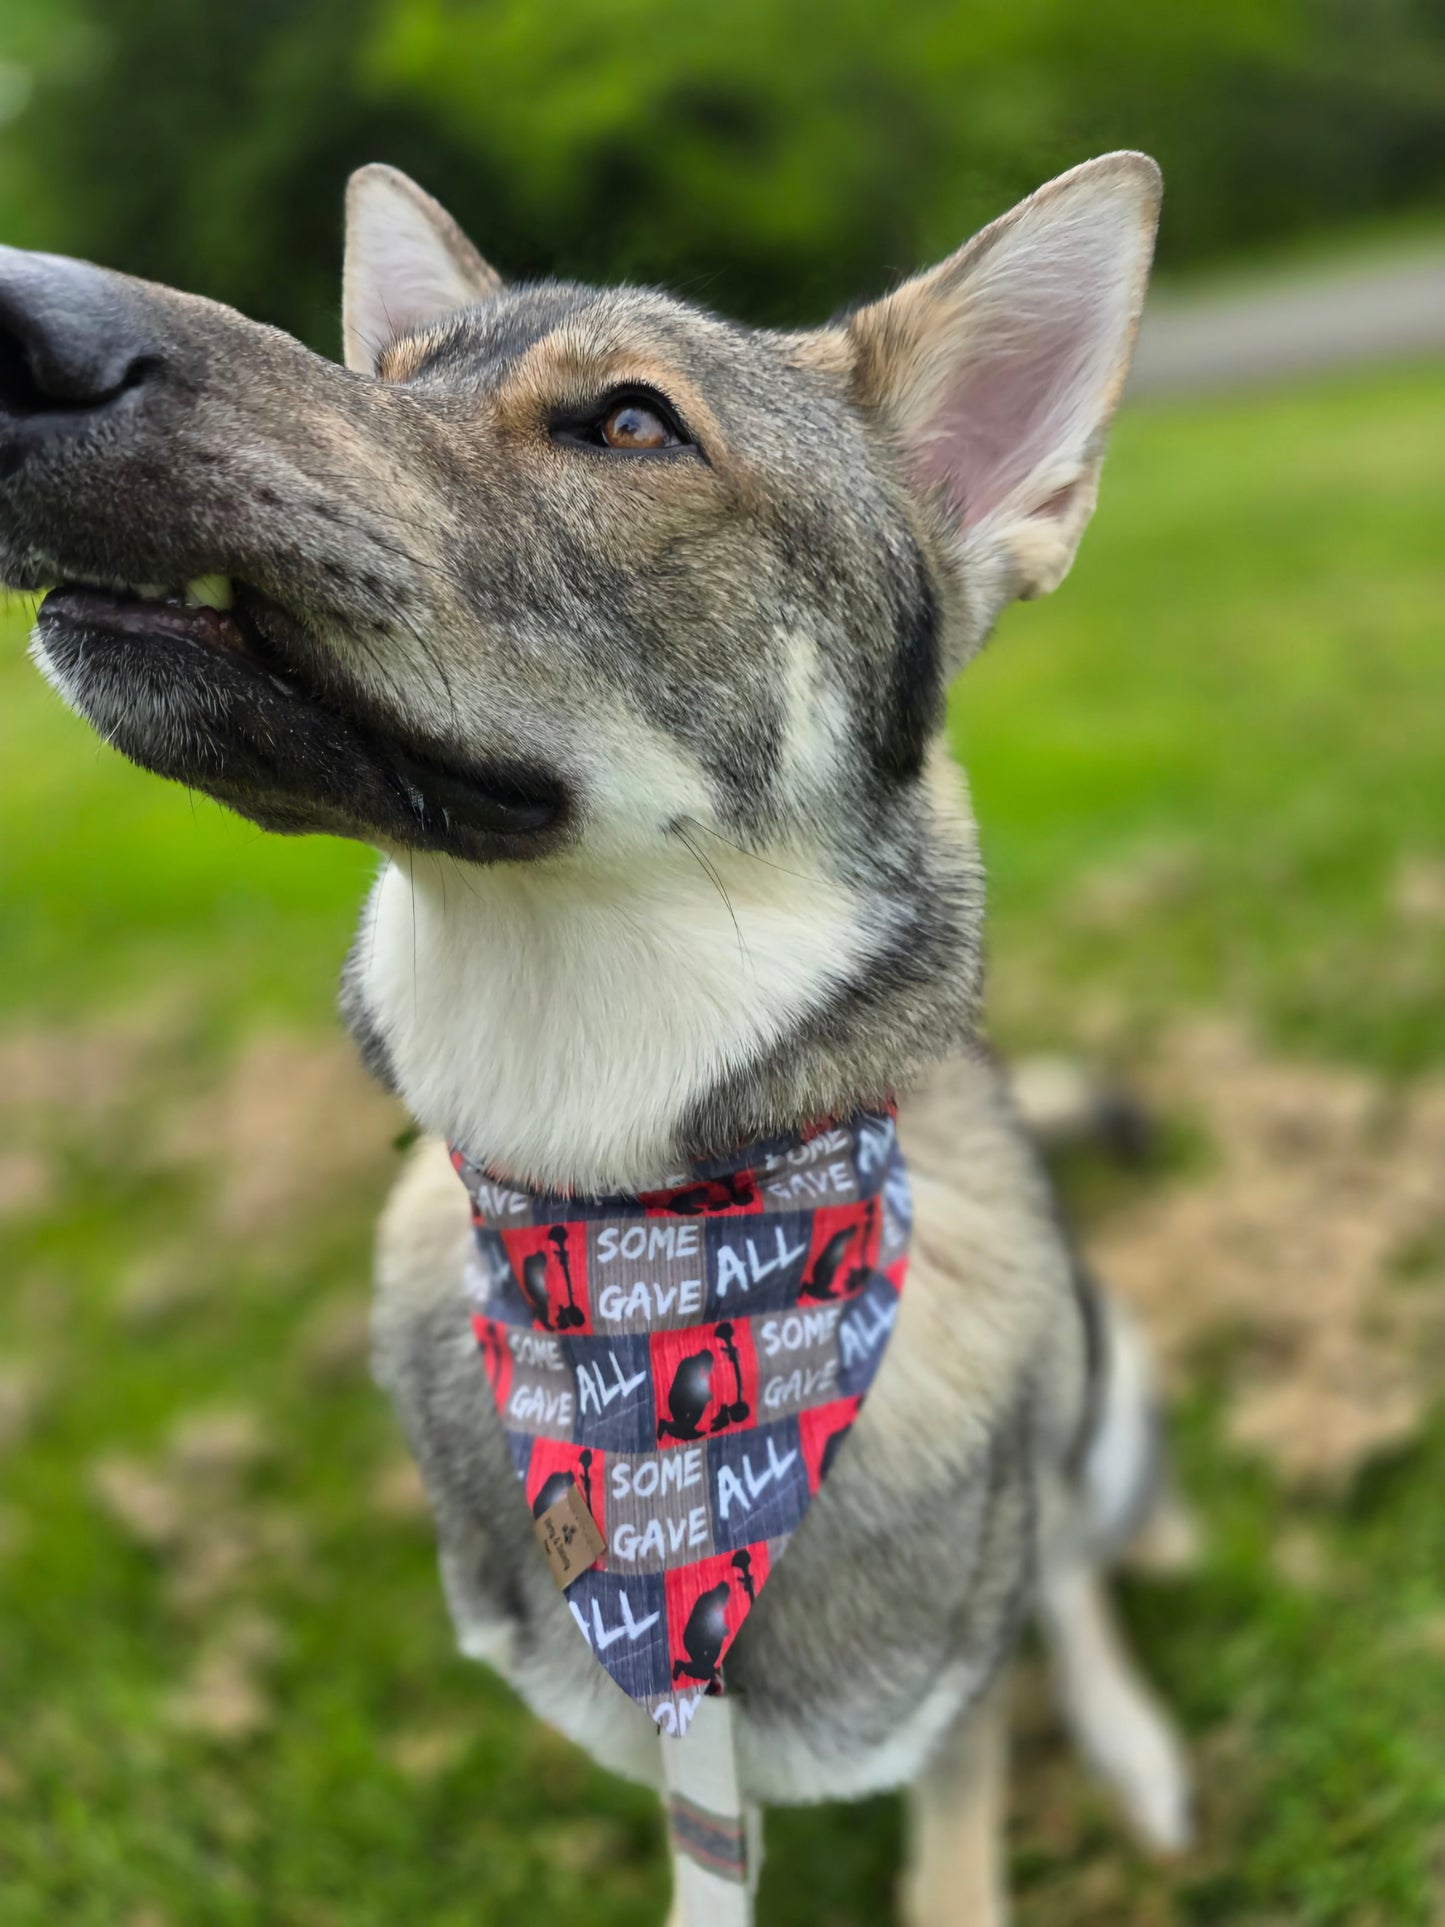 FUNDRAISER For Warrior Dog Foundation! Some Gave All/Soldiers Reversible Bandana